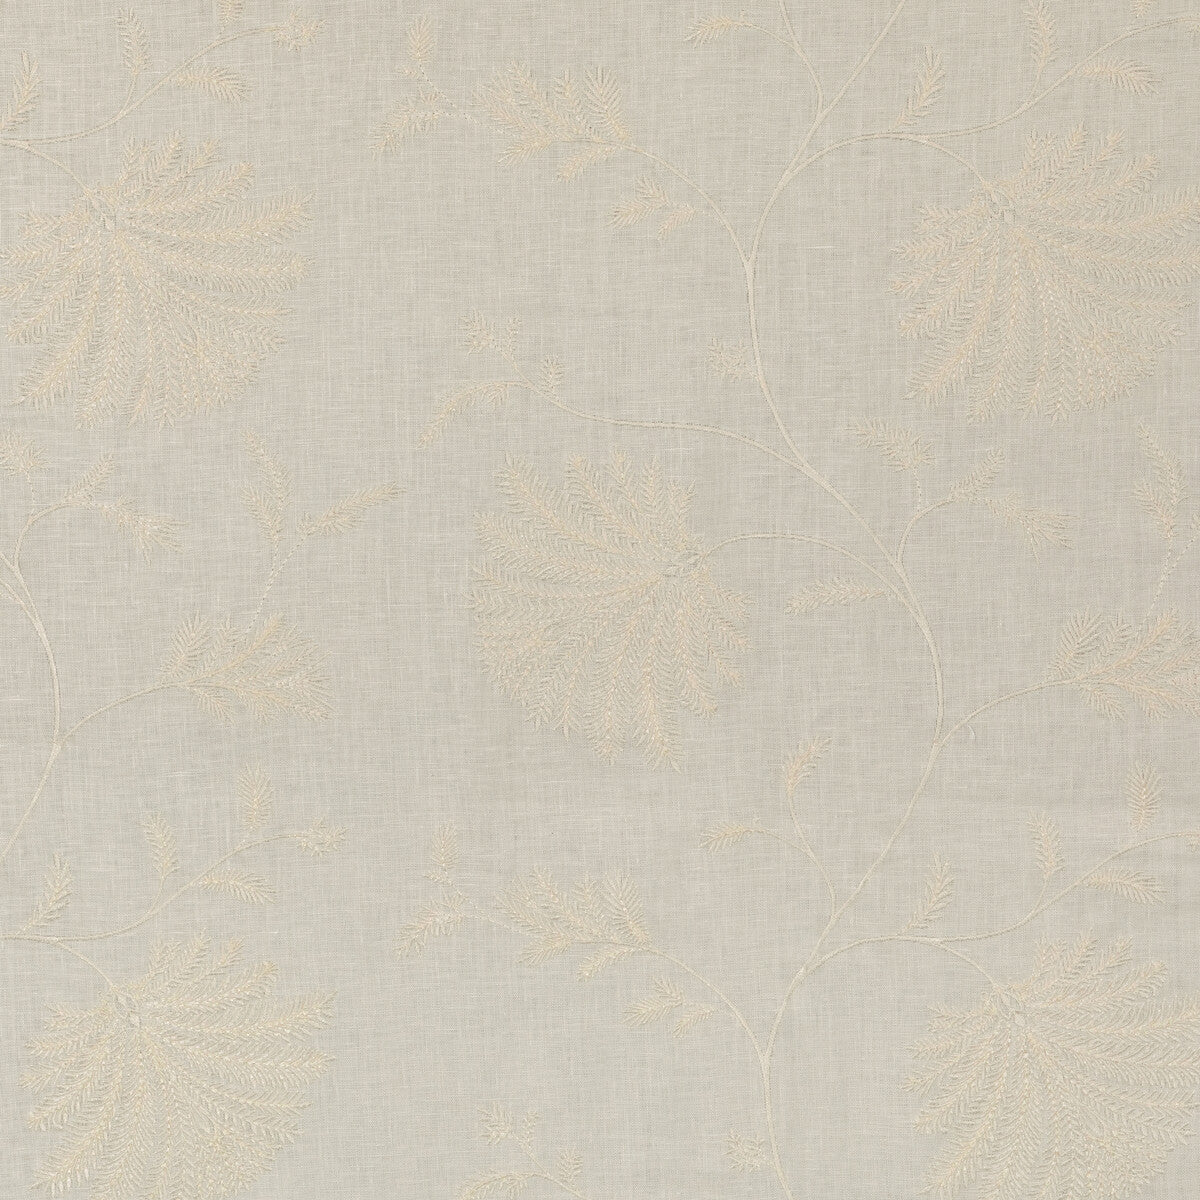 Maelle Emb fabric in ivory color - pattern 8023116.1.0 - by Brunschwig &amp; Fils in the Anduze Embroideries collection